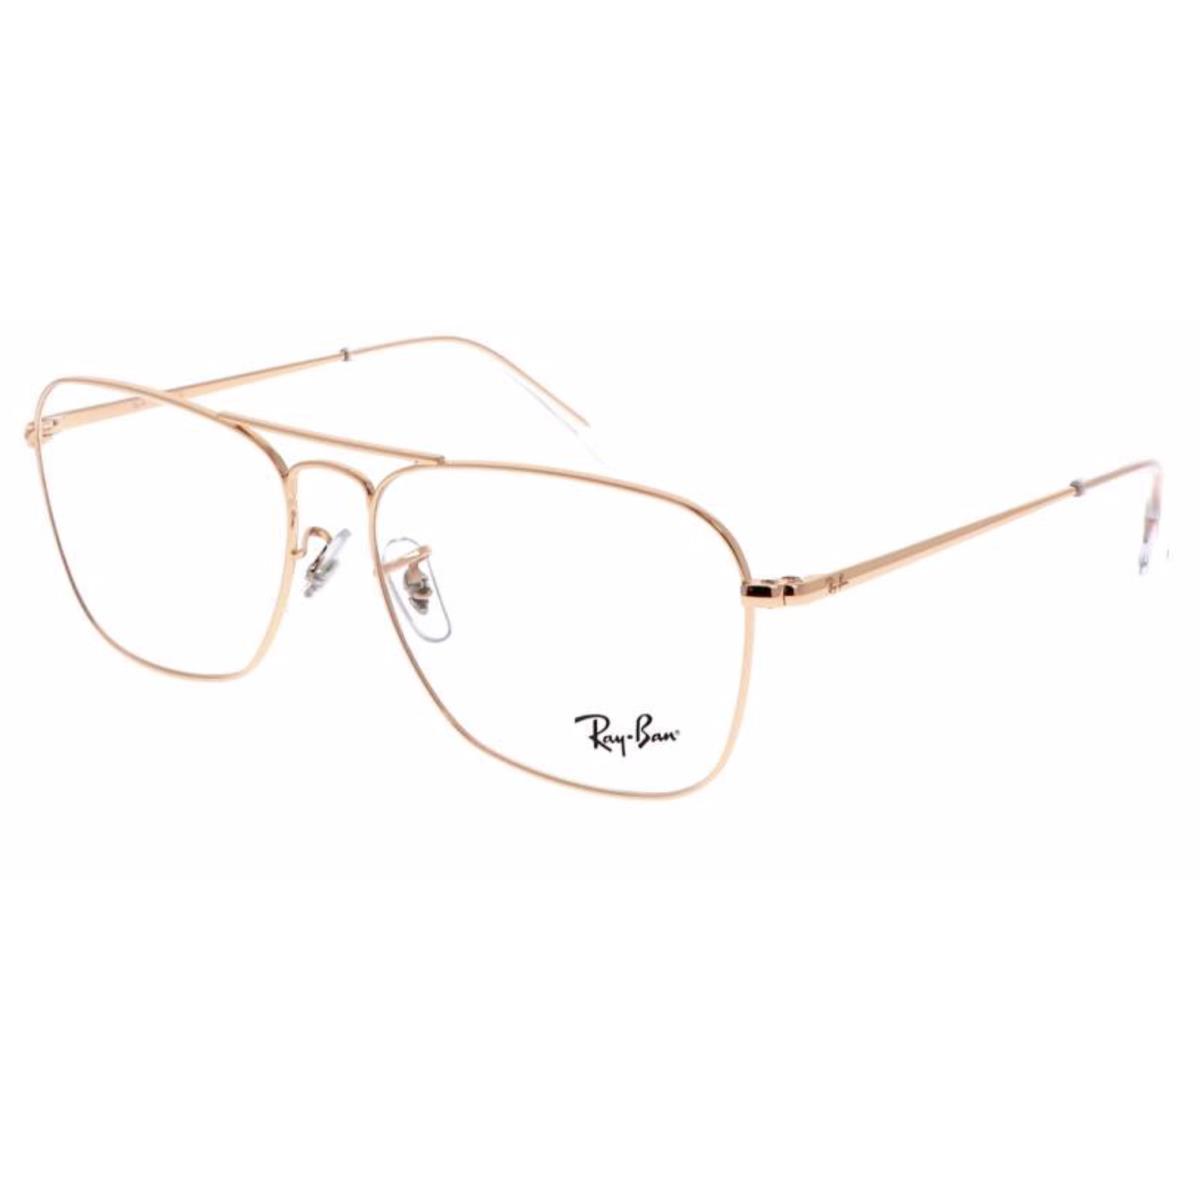 Ray-ban Caravan II Rx-able Eyeglasses RB 6536 3094 55-15 140 Gold Frames - Gold Frame, Clear Demo with imprint Lens